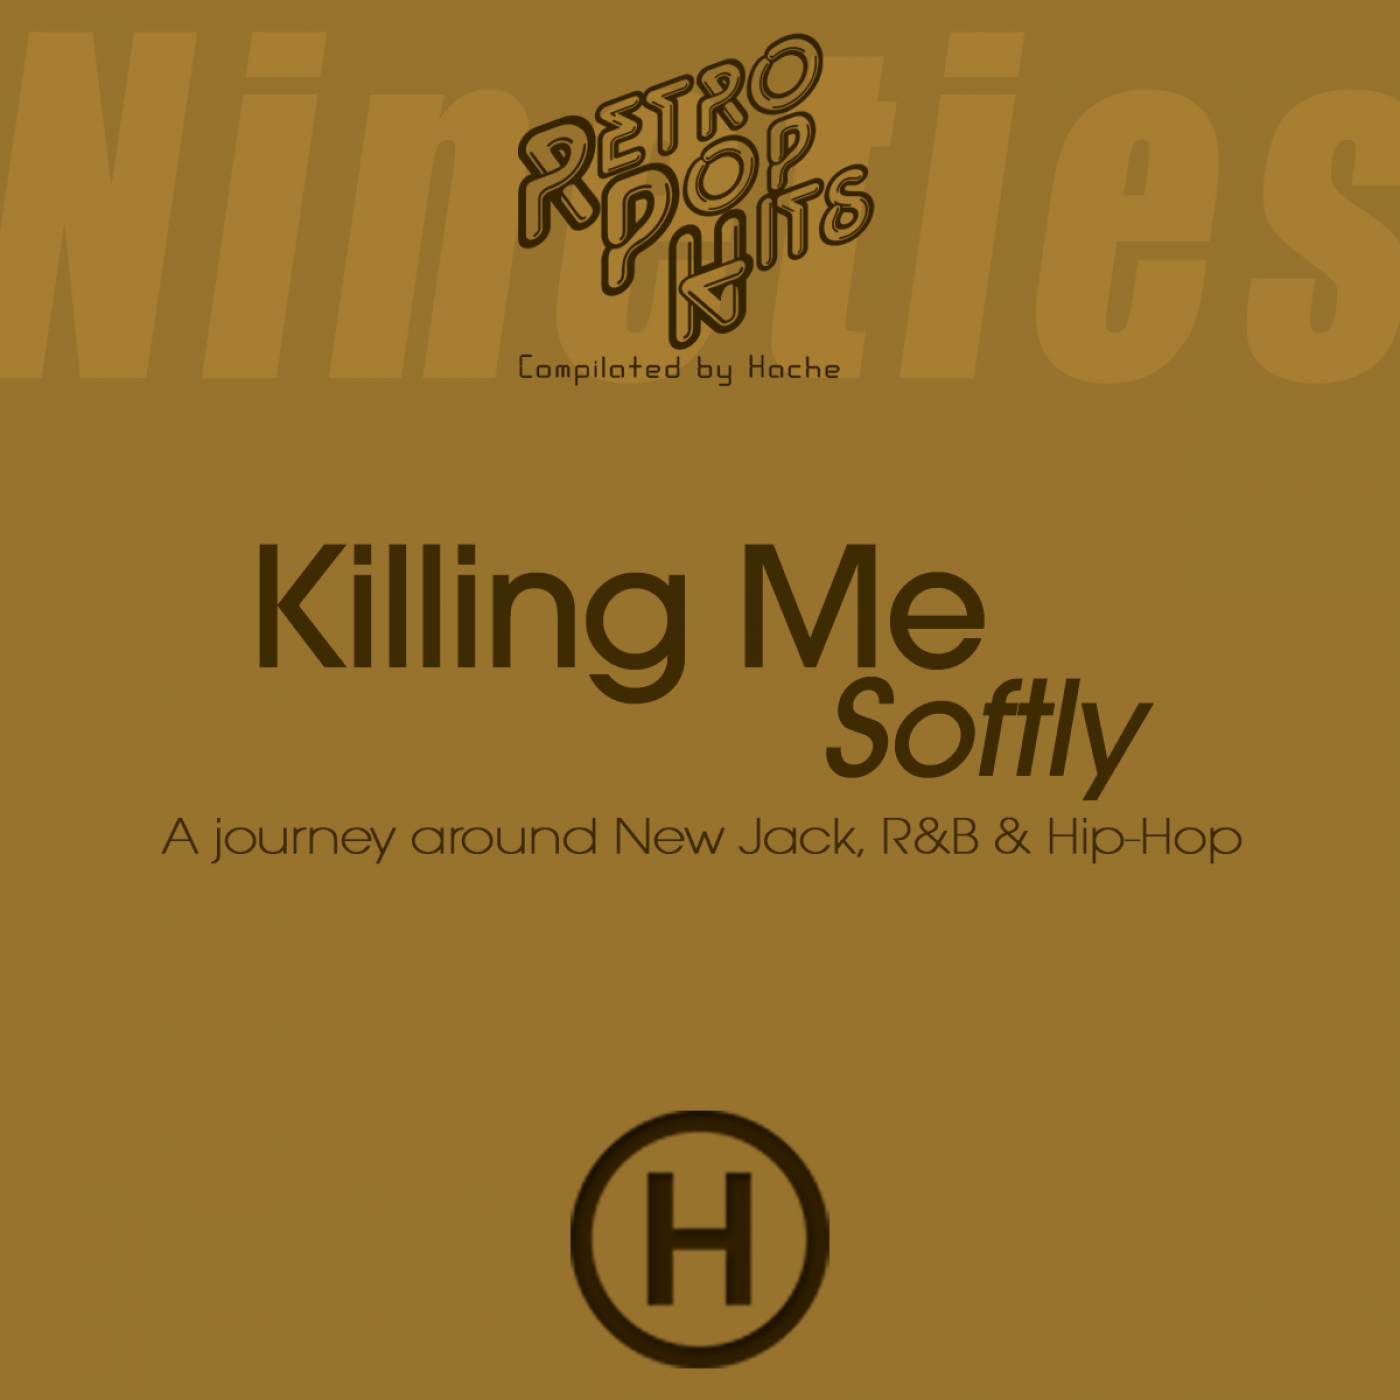 90s Killing Me Softly (Compilated by Hache)